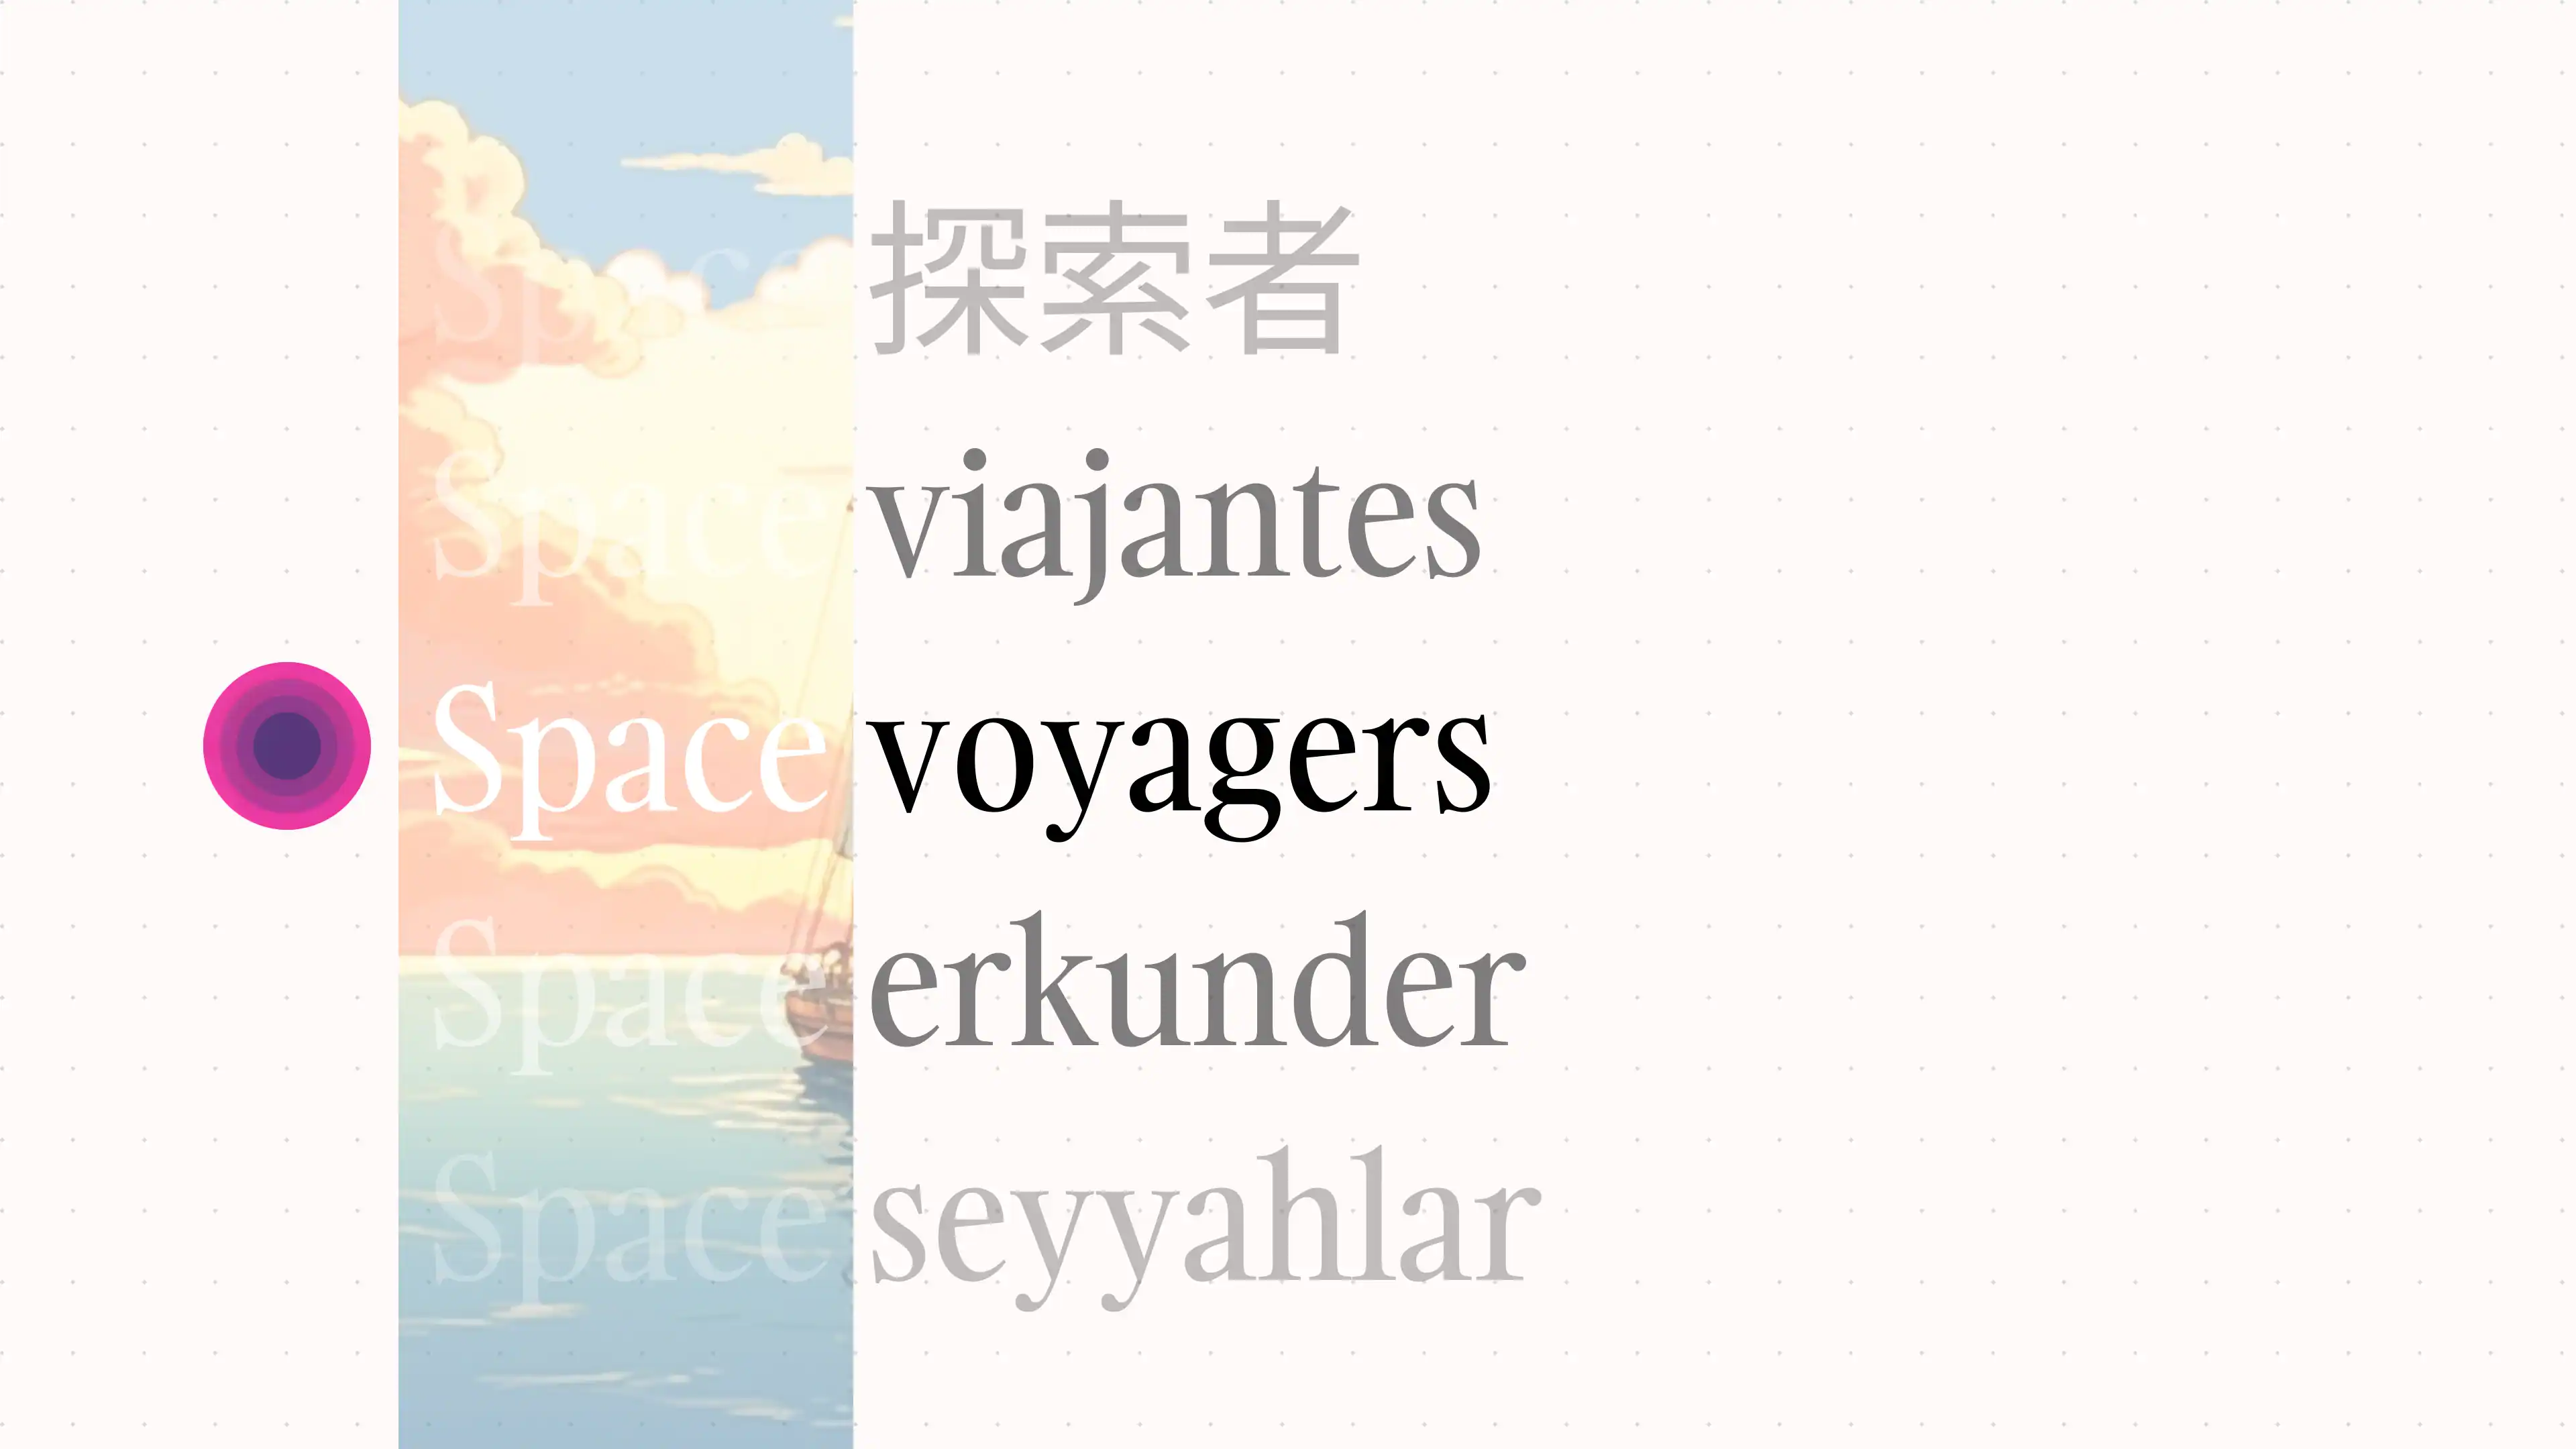 space-voyagers